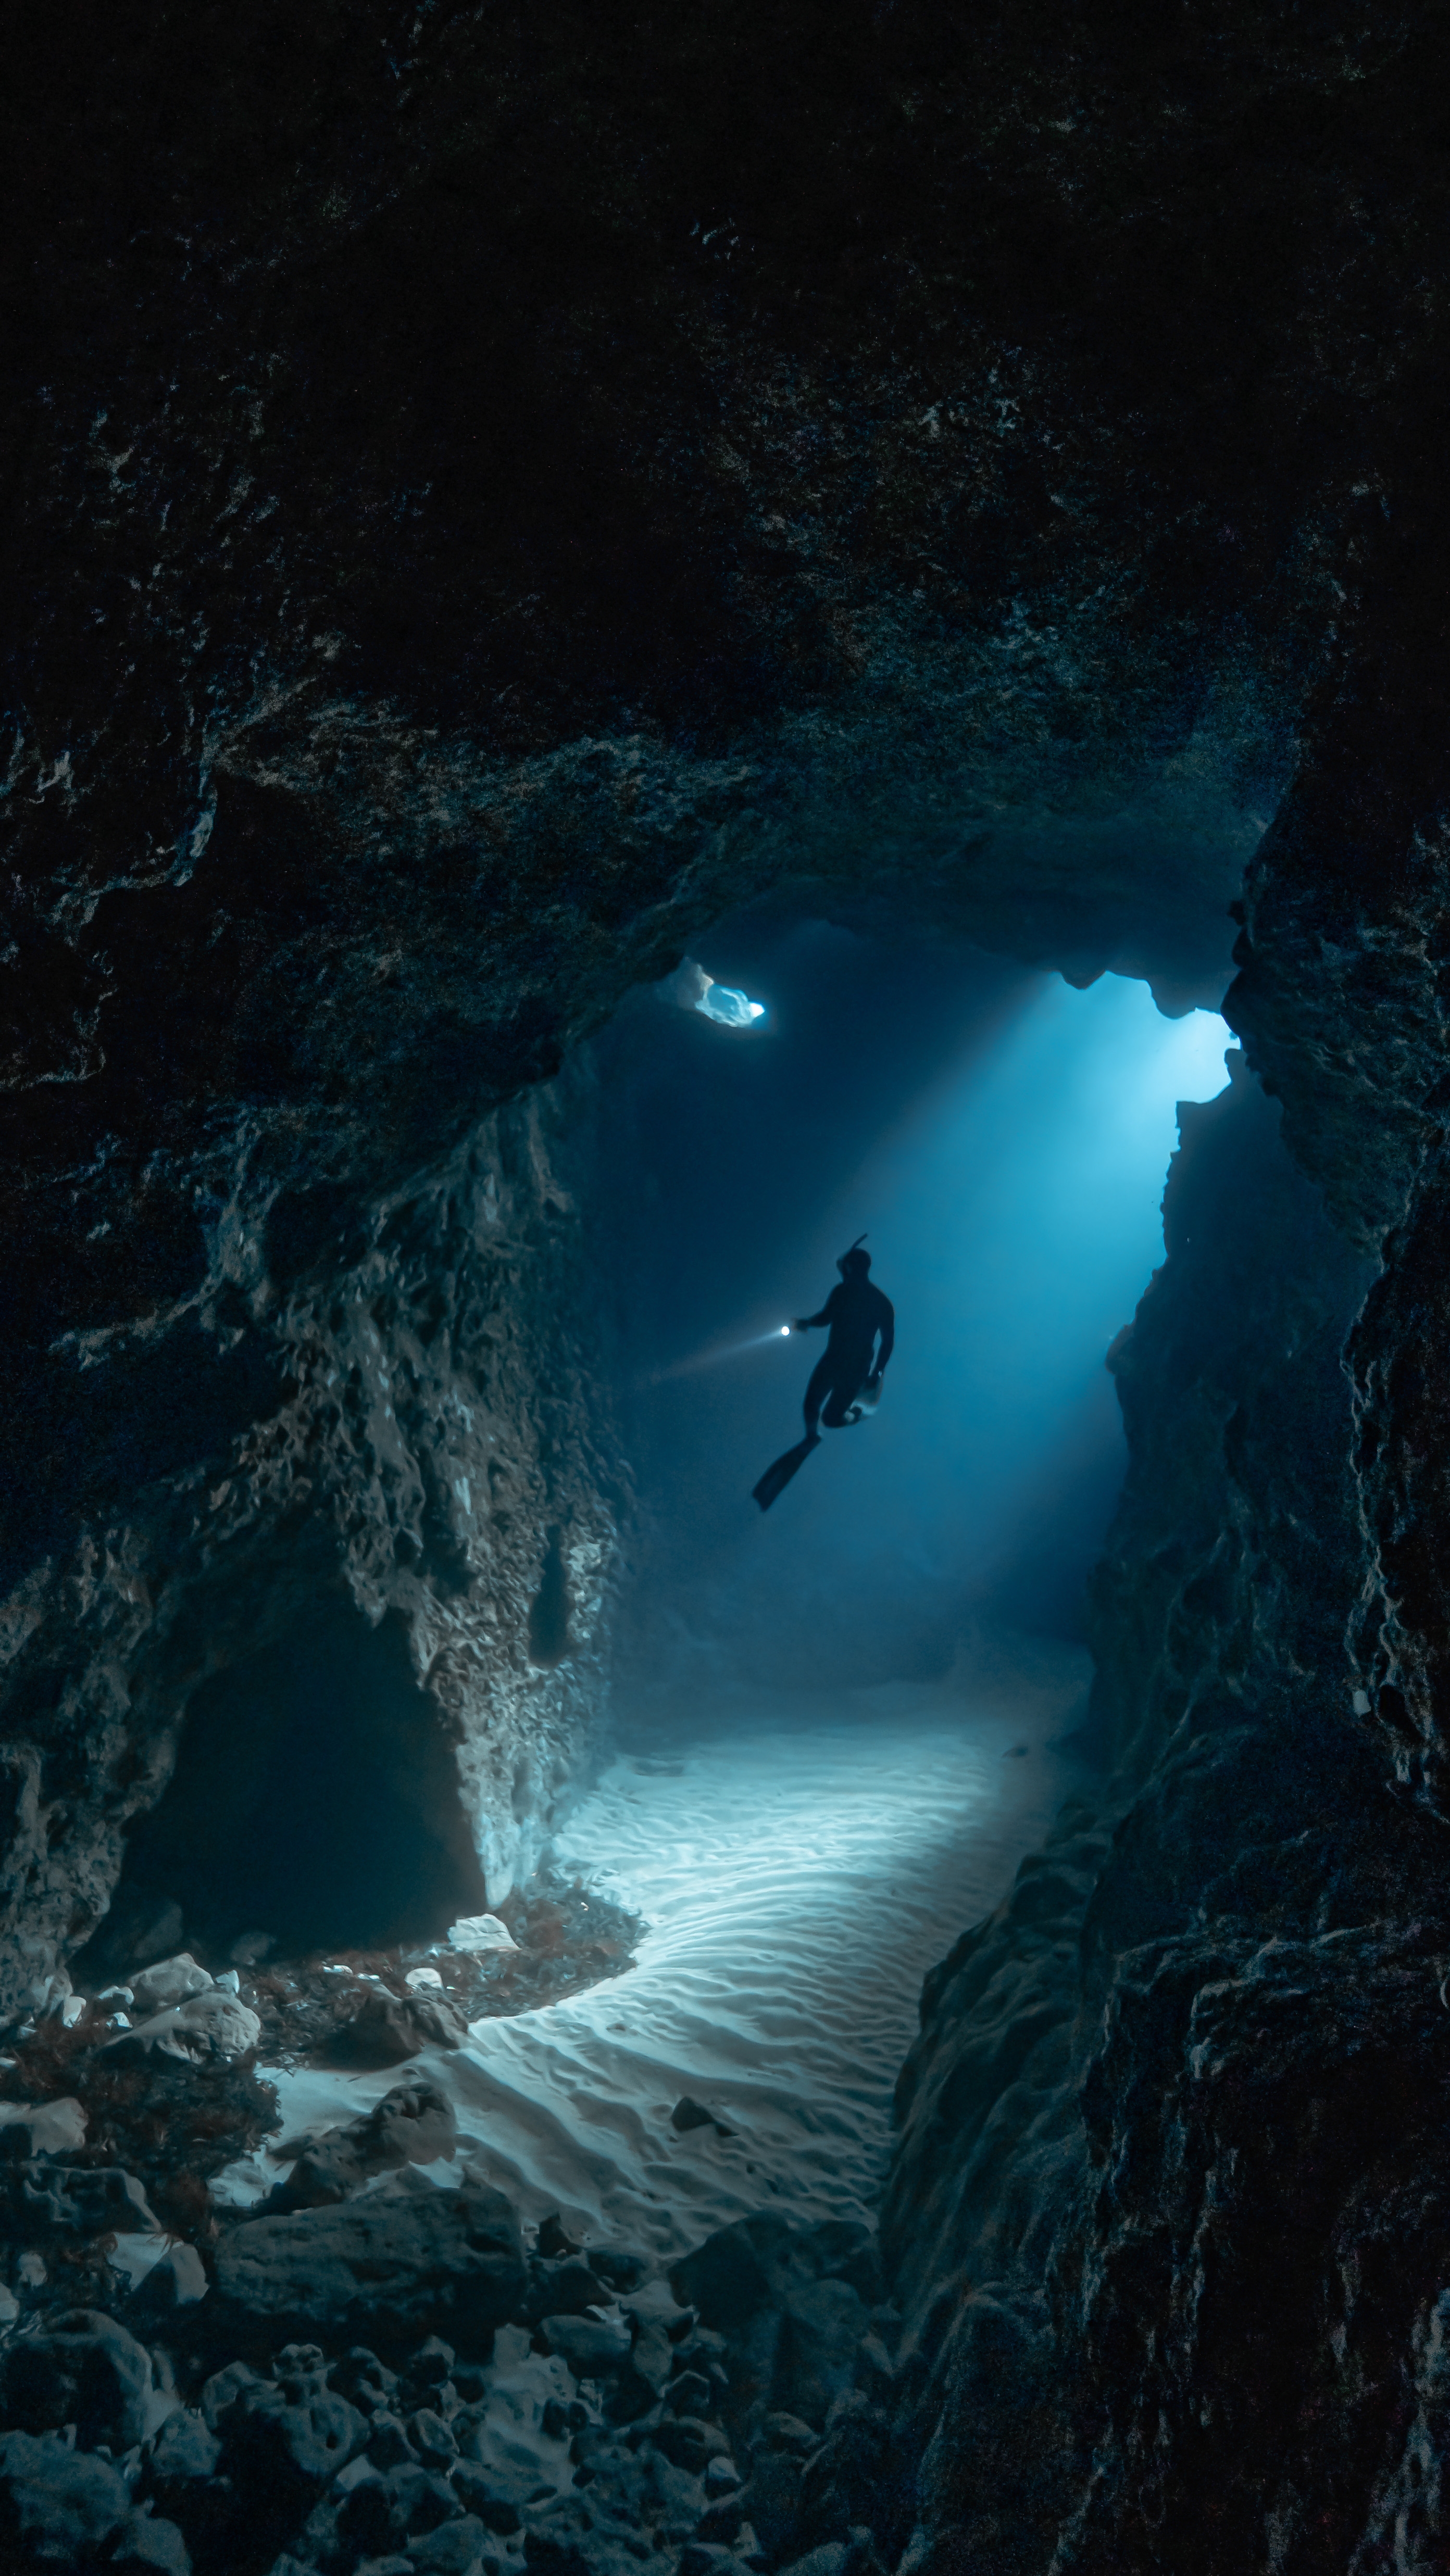 A free diver in an underwater cave network